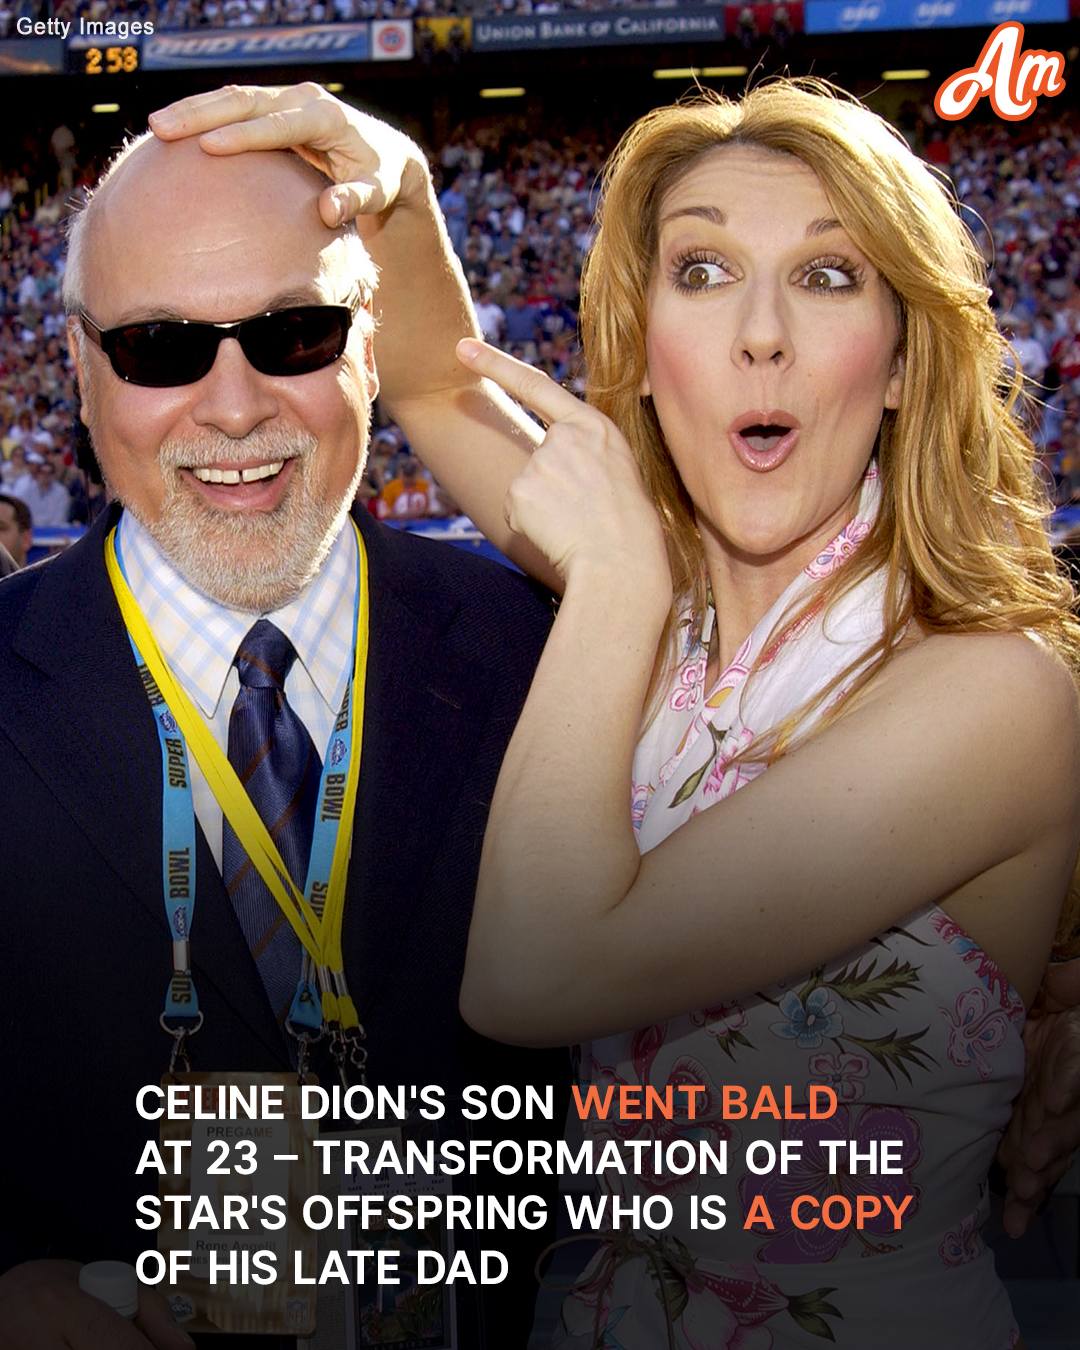 How does Celine Dion’s eldest son, who RESEMBLES HIS DAD, look? The photos of the young man are in the comments.👇